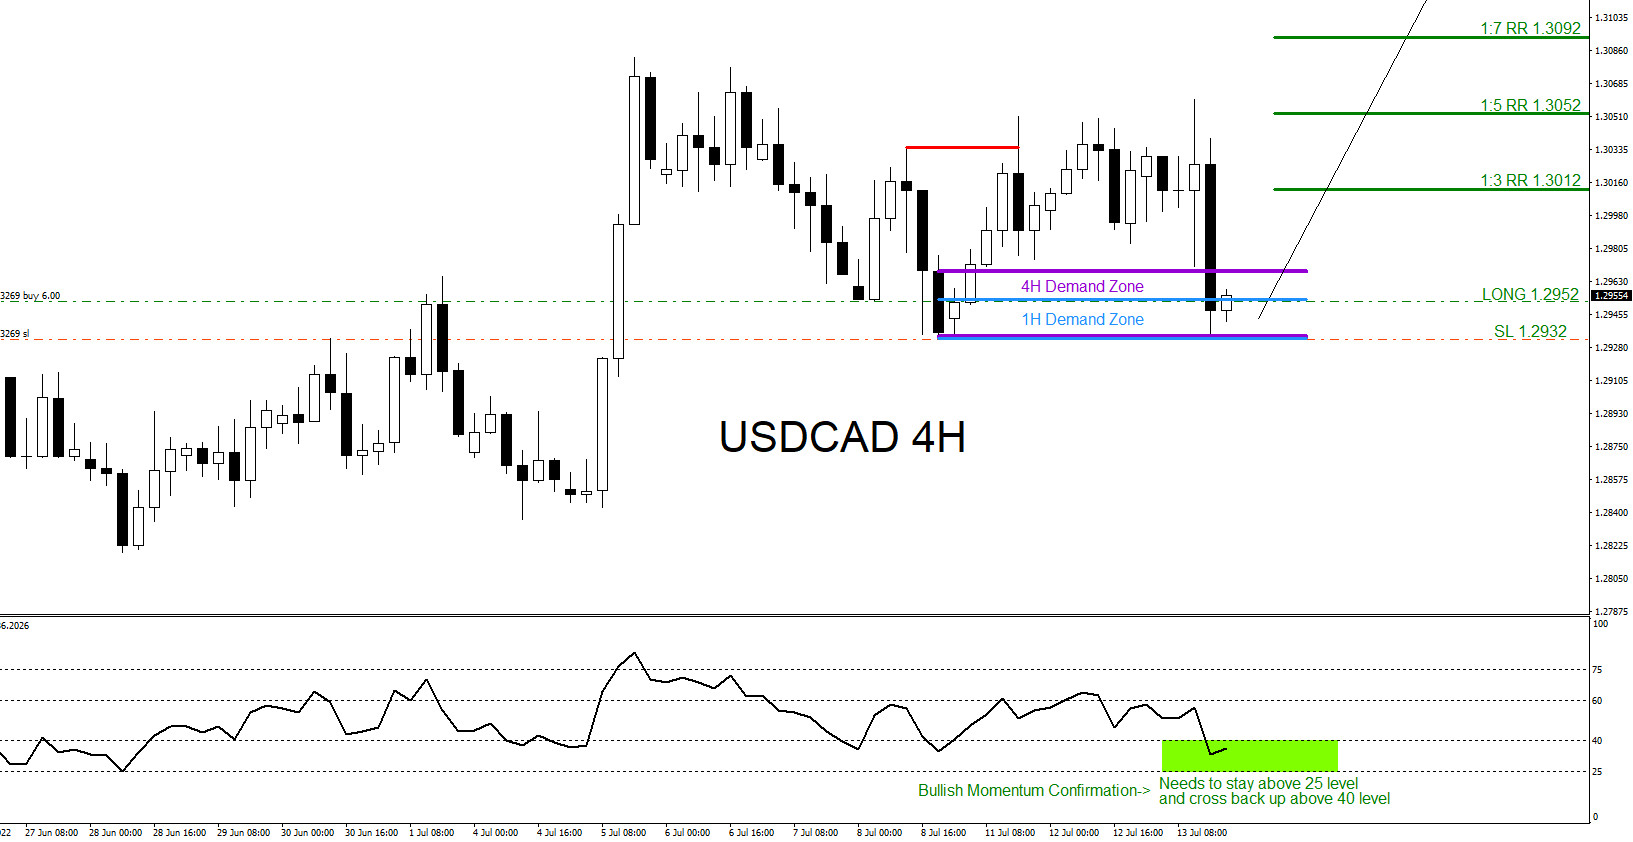 USDCAD : Trading the Rally Higher